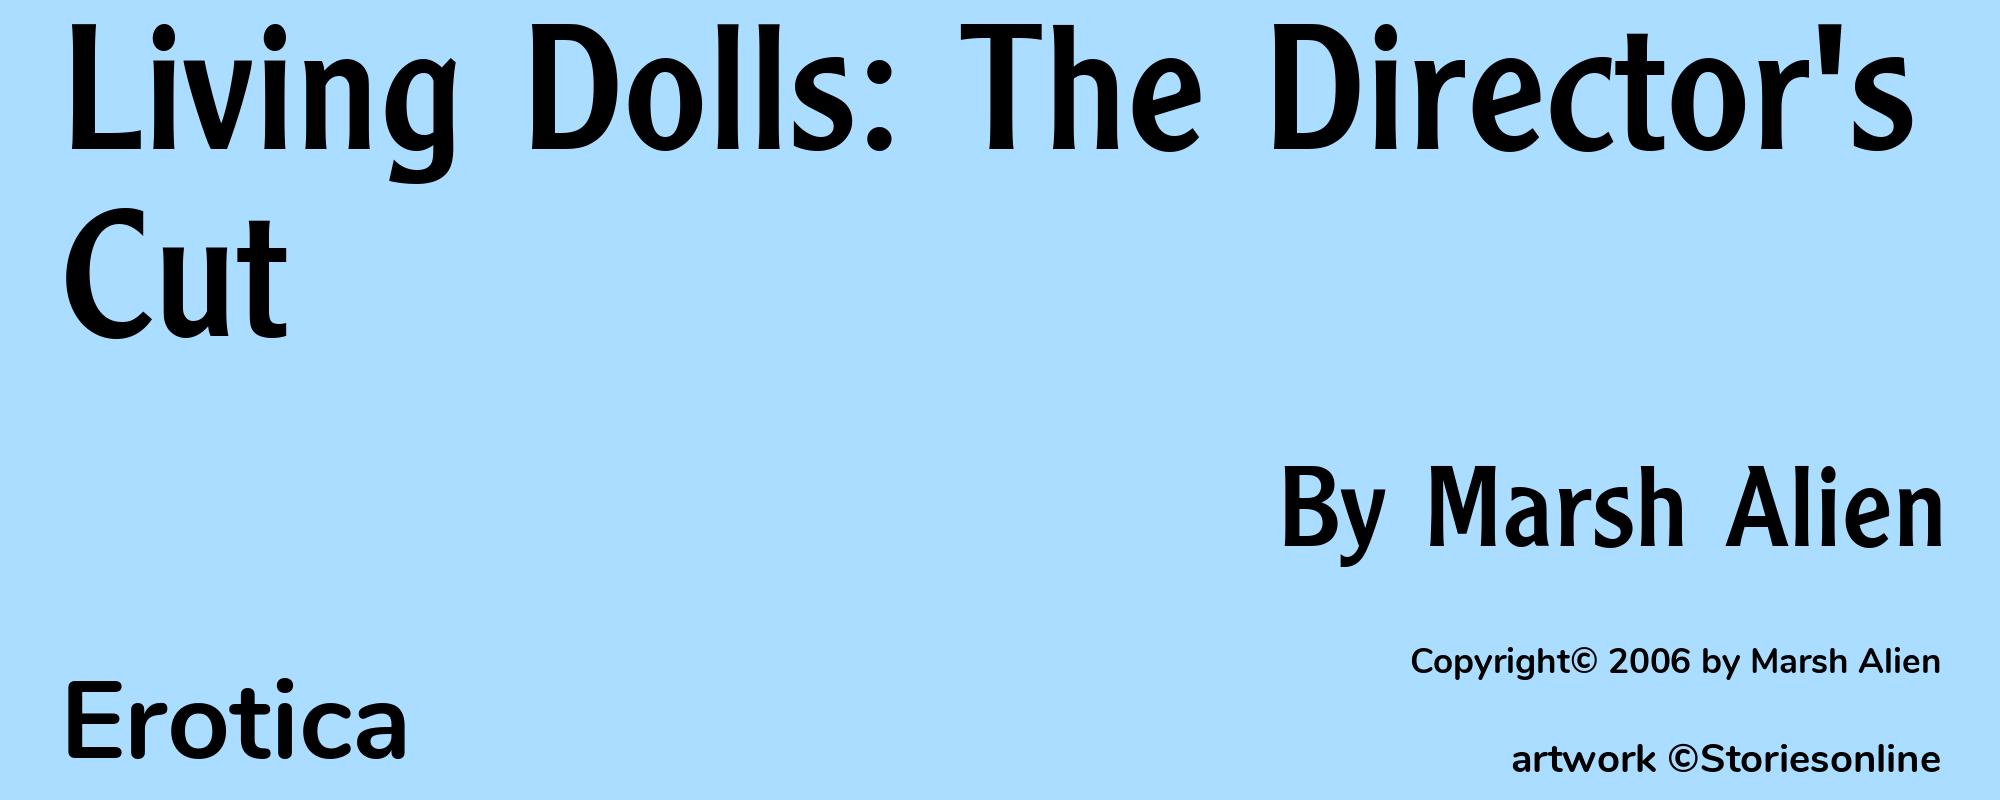 Living Dolls: The Director's Cut - Cover